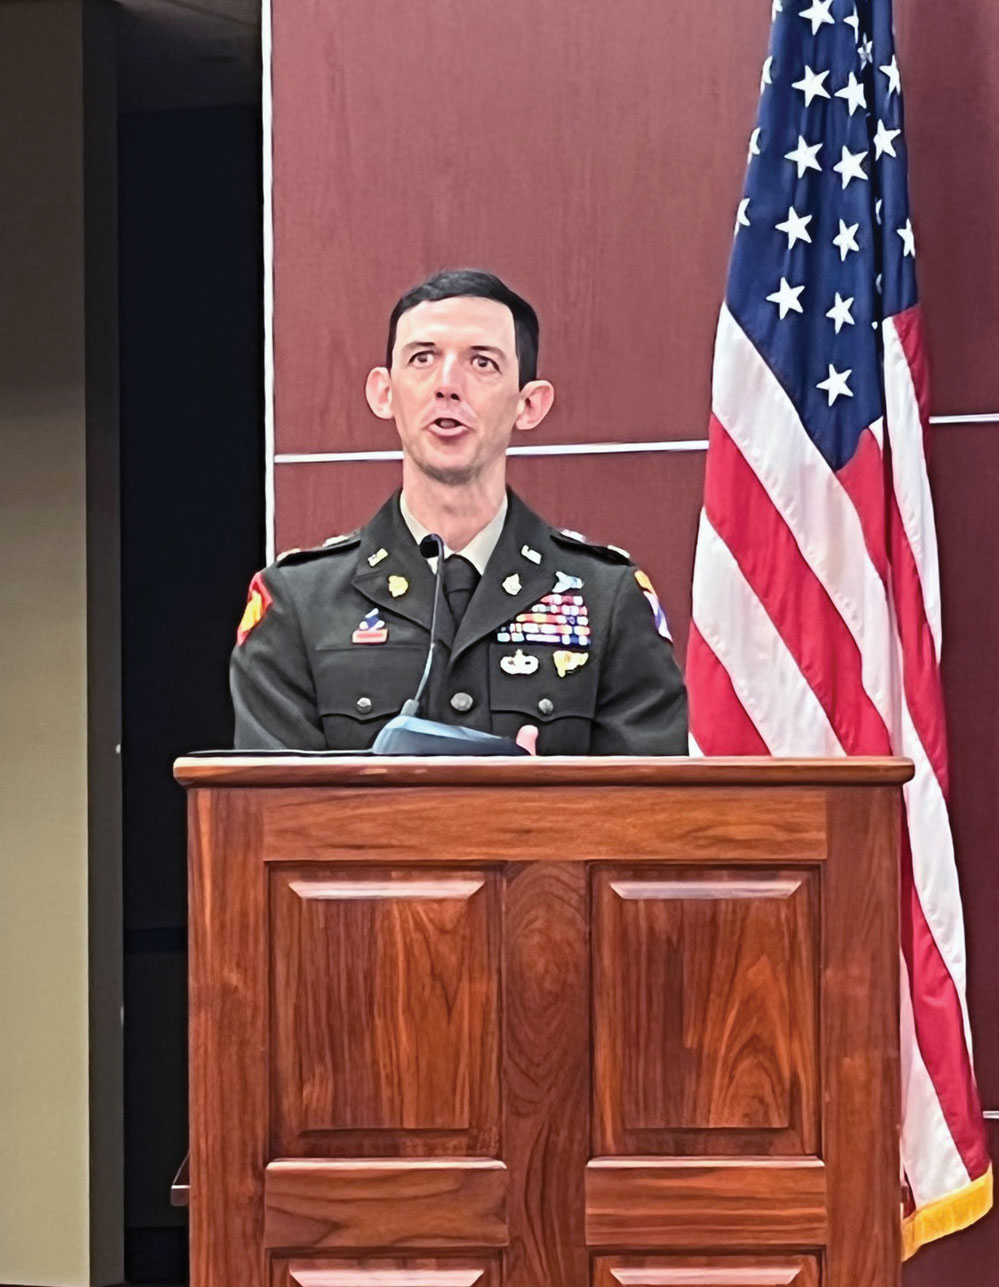 Maj. Joseph A. Bedingfield recipient of the 2022 LTC Ronald C. Ward Distinguished Special Operations Forces Student Award, delivers remarks during the award ceremony on June 9, 2022, in Marshall Auditorium of the Lewis and Clark Center on Fort Leavenworth.